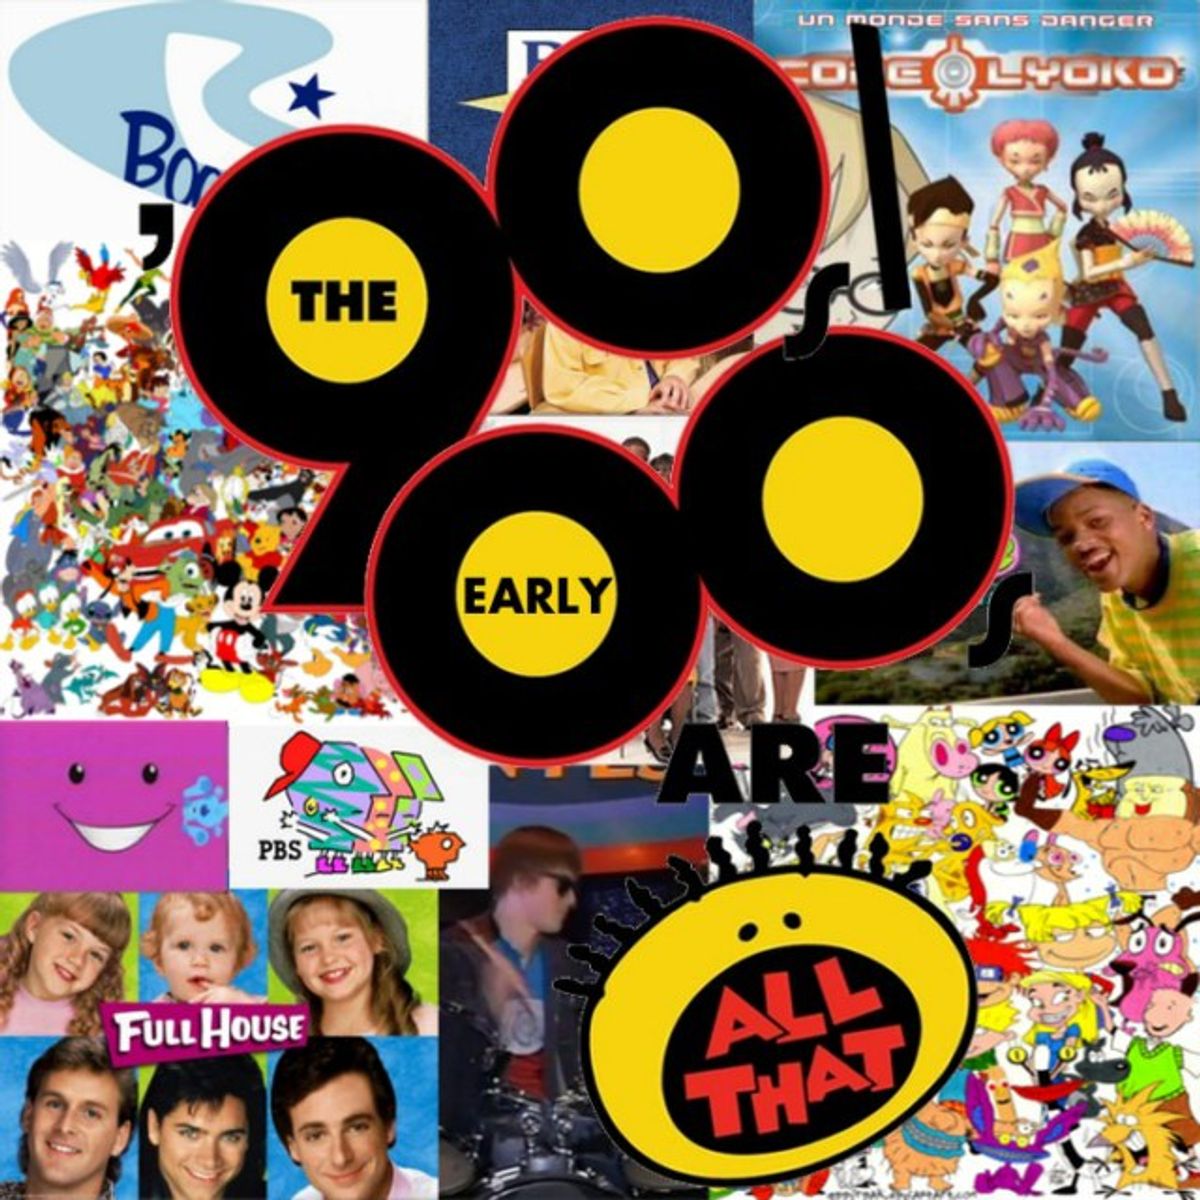 25 Things From The 90s-2000s Sure To Give You Nostalgia